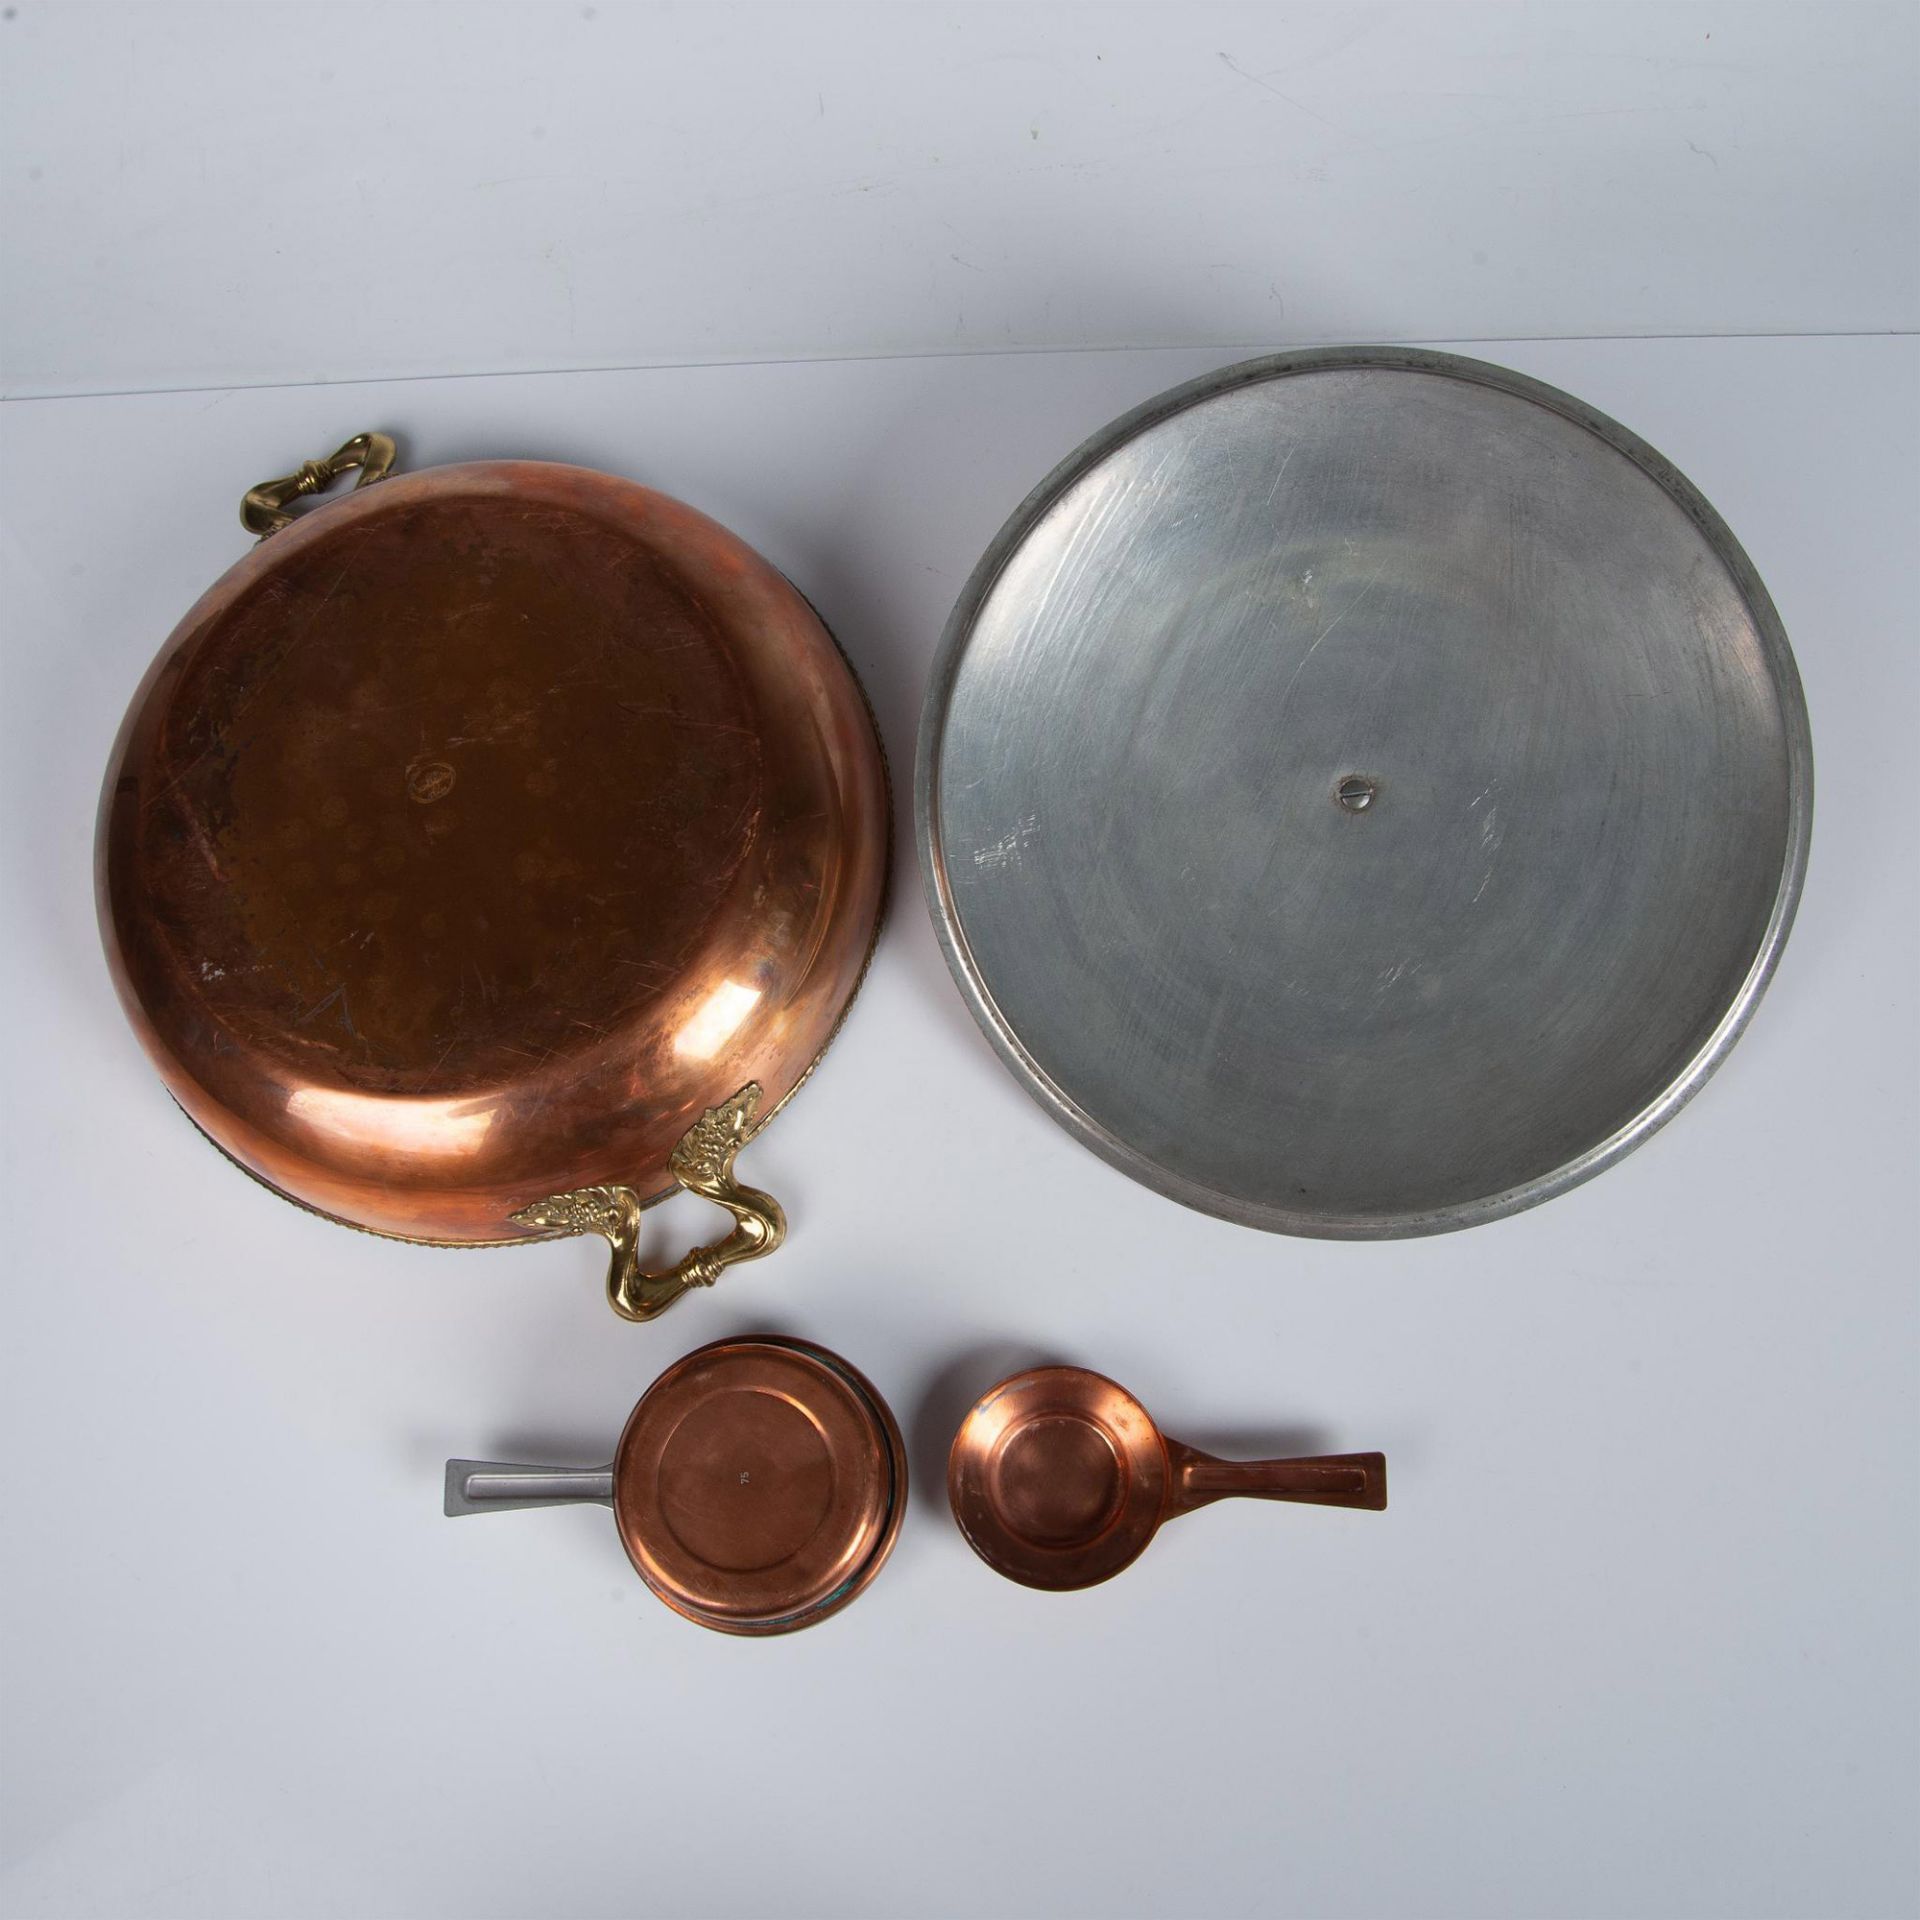 3pc Copper Cookware, Bongusto Braiser and Swiss Burner - Image 6 of 8